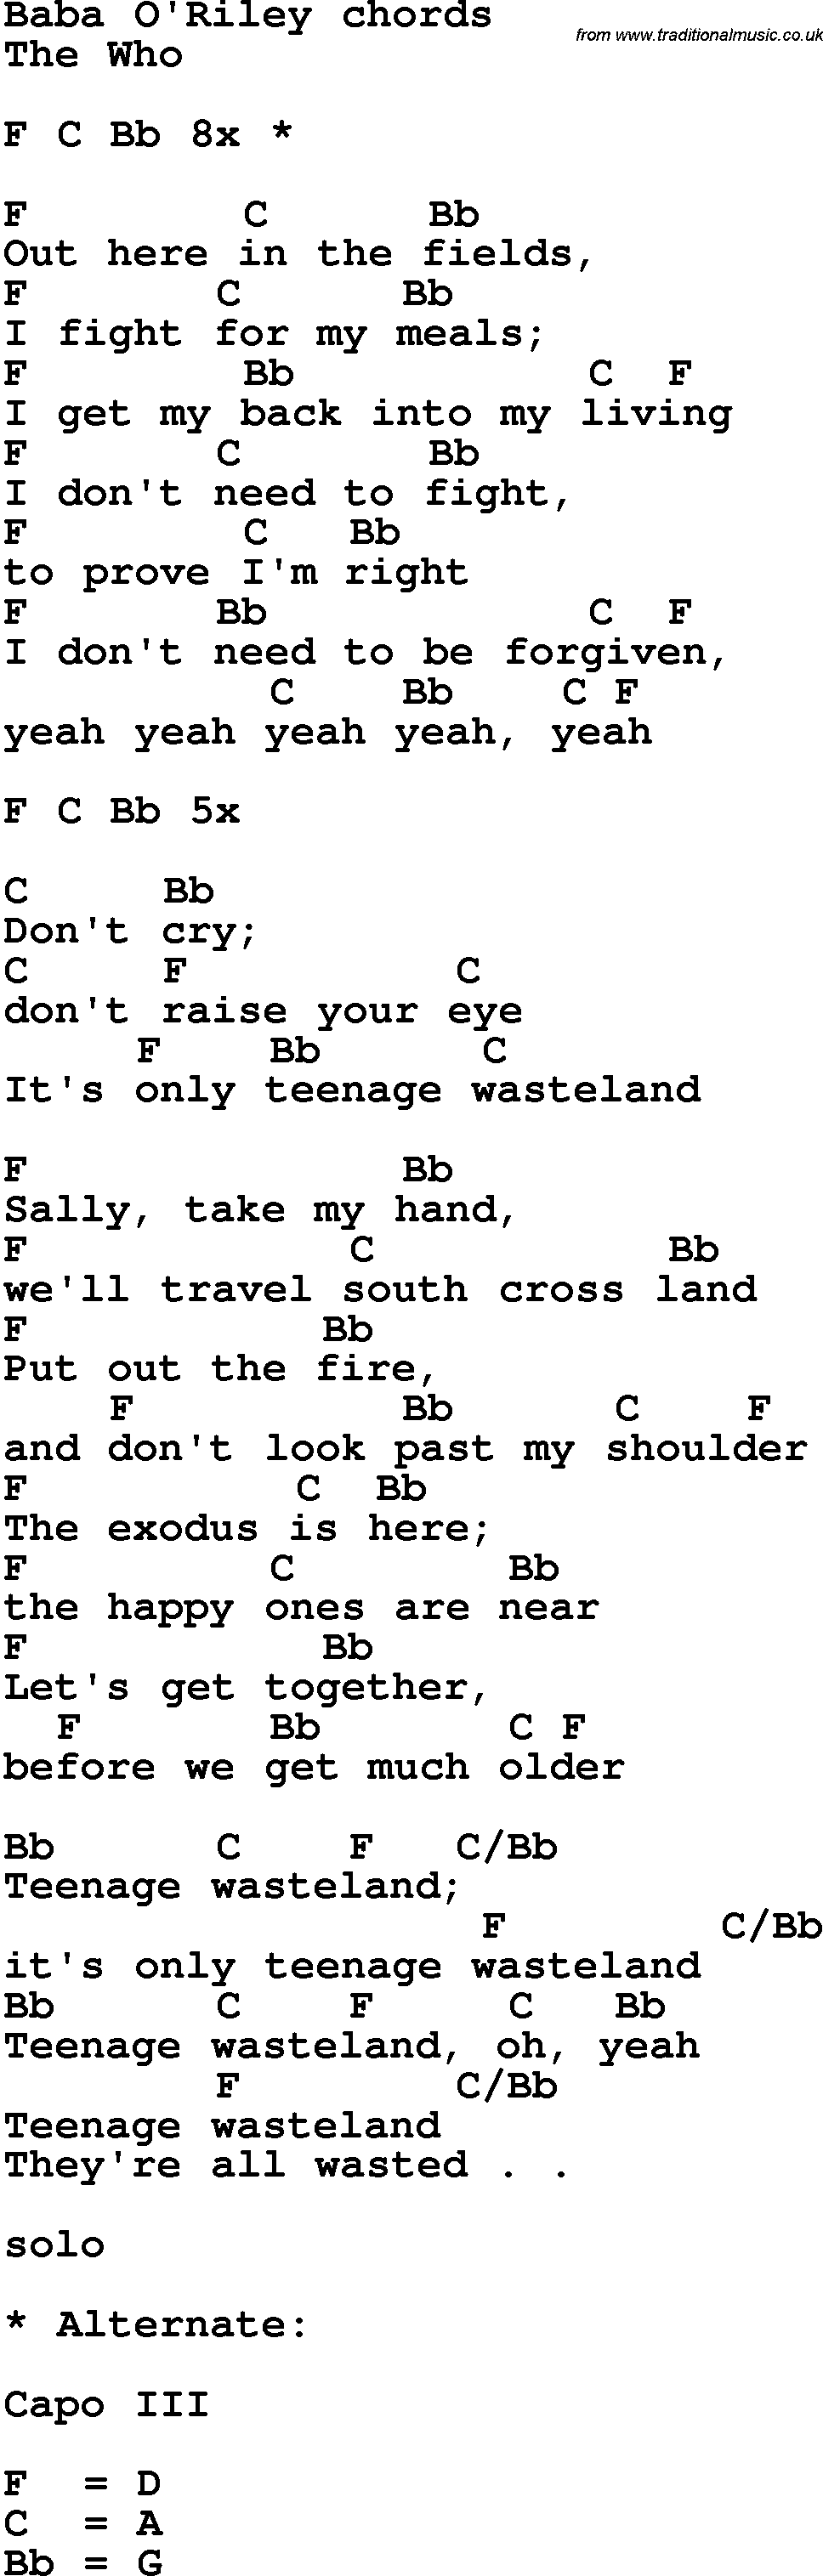 Song Lyrics with guitar chords for Baba Oriley